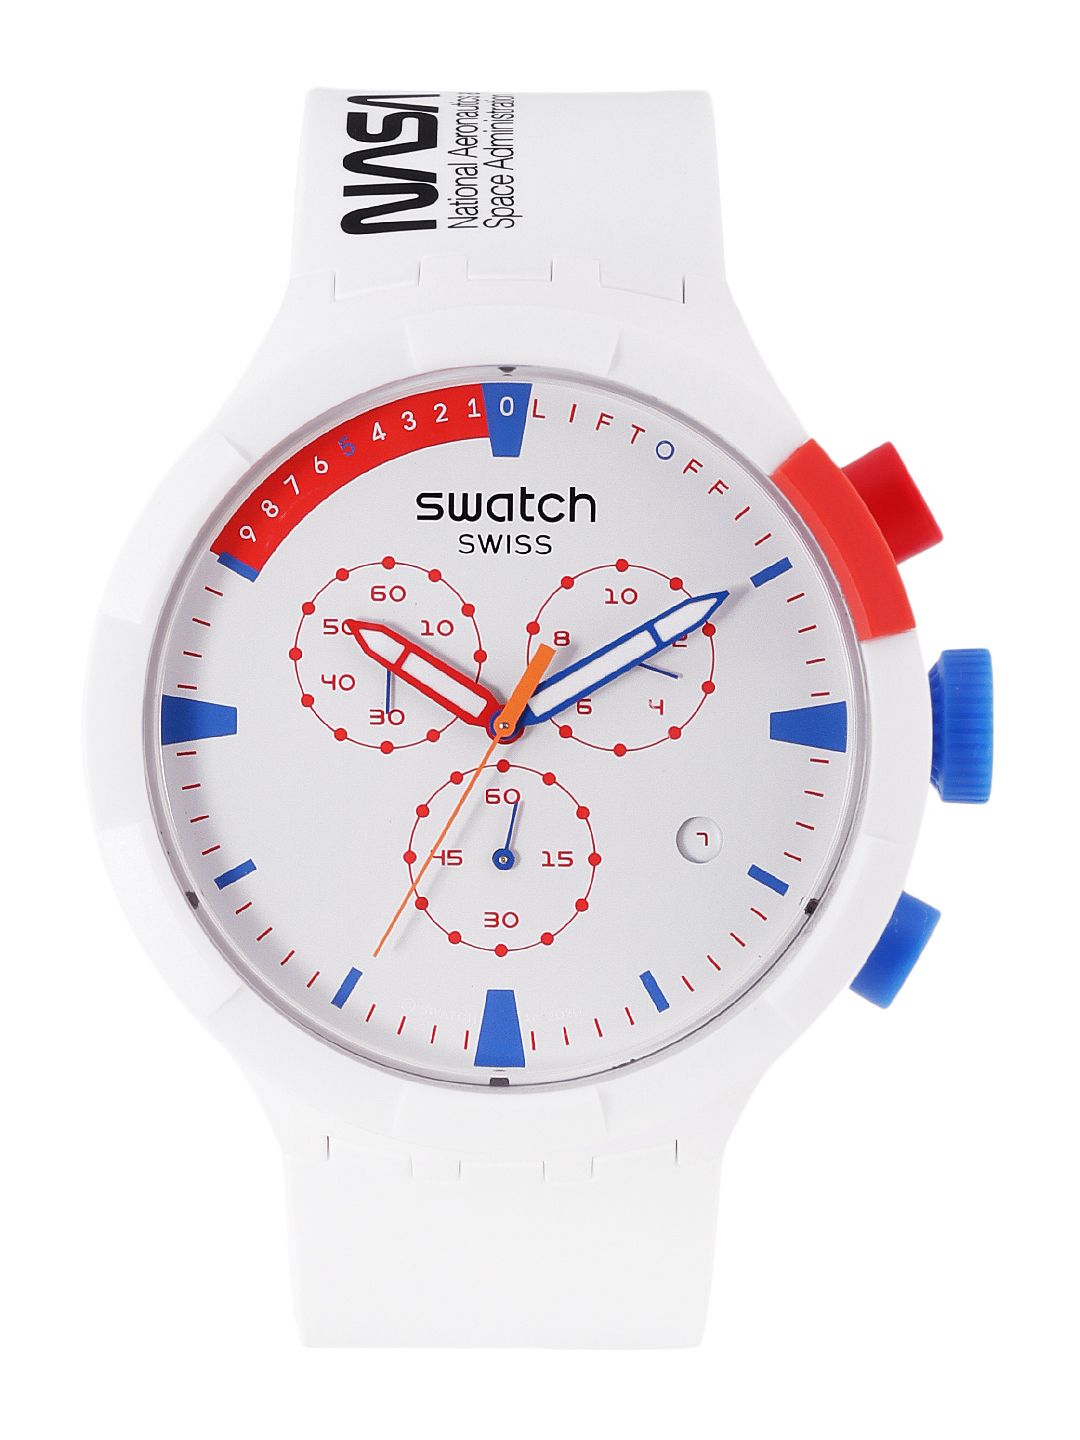 Swatch Unisex White Swiss Made Water Resistant Analogue Watch SB04Z400 Price in India